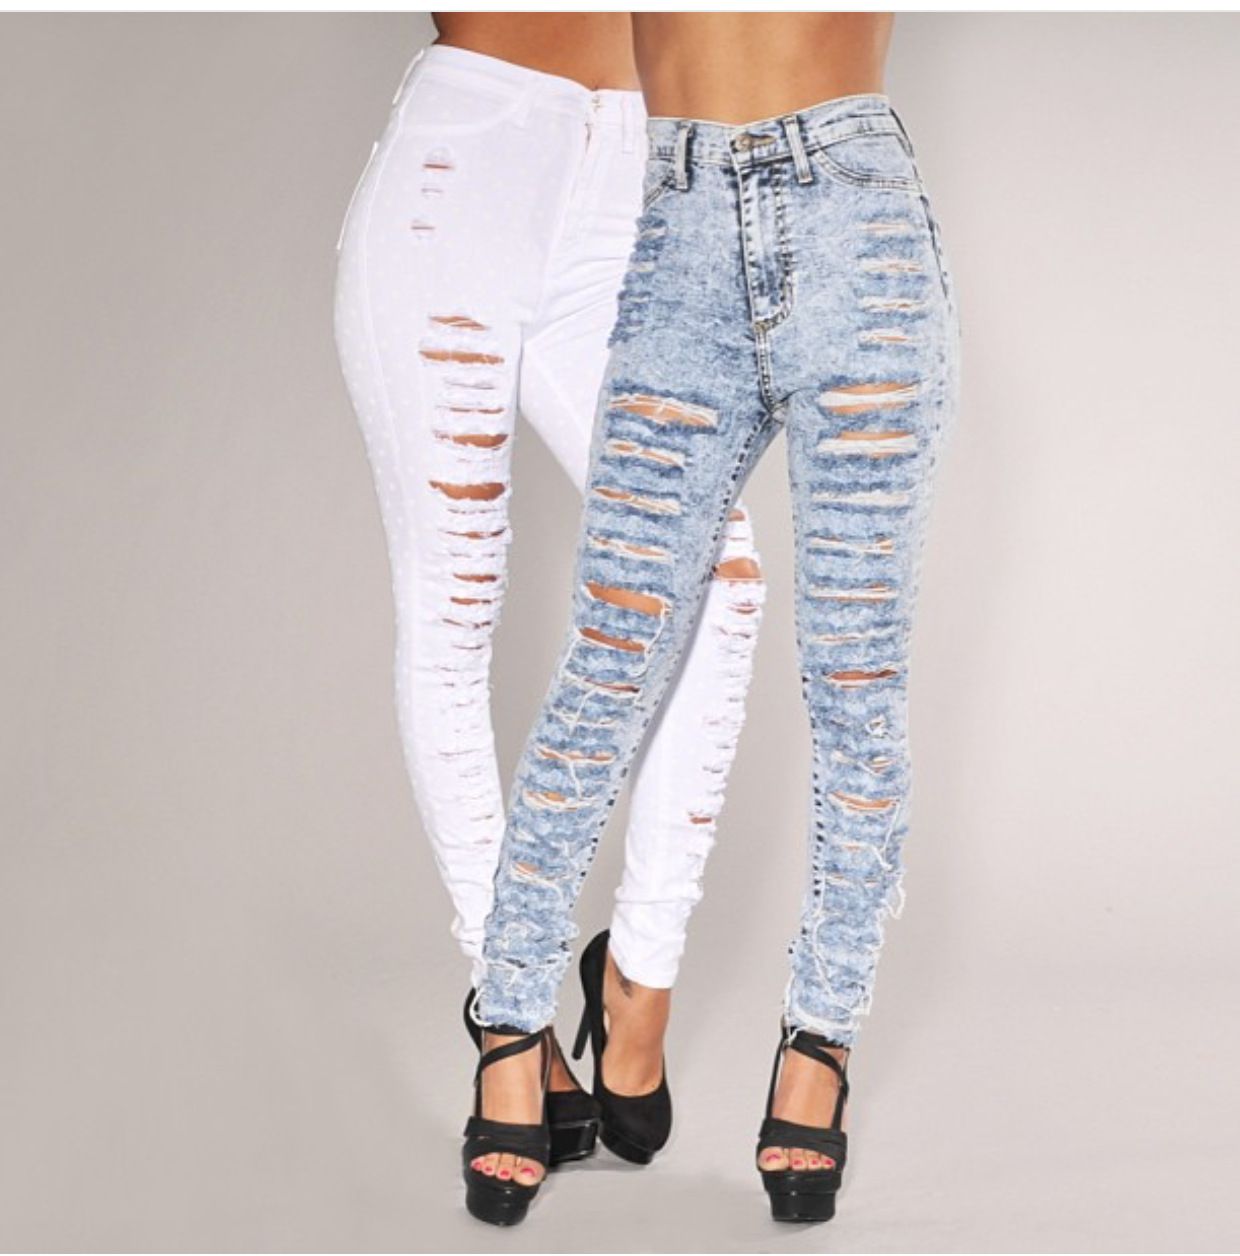 2020 Ripped Jeans For Women Skinny High Waist Pantalones Vaqueros Mujer ...